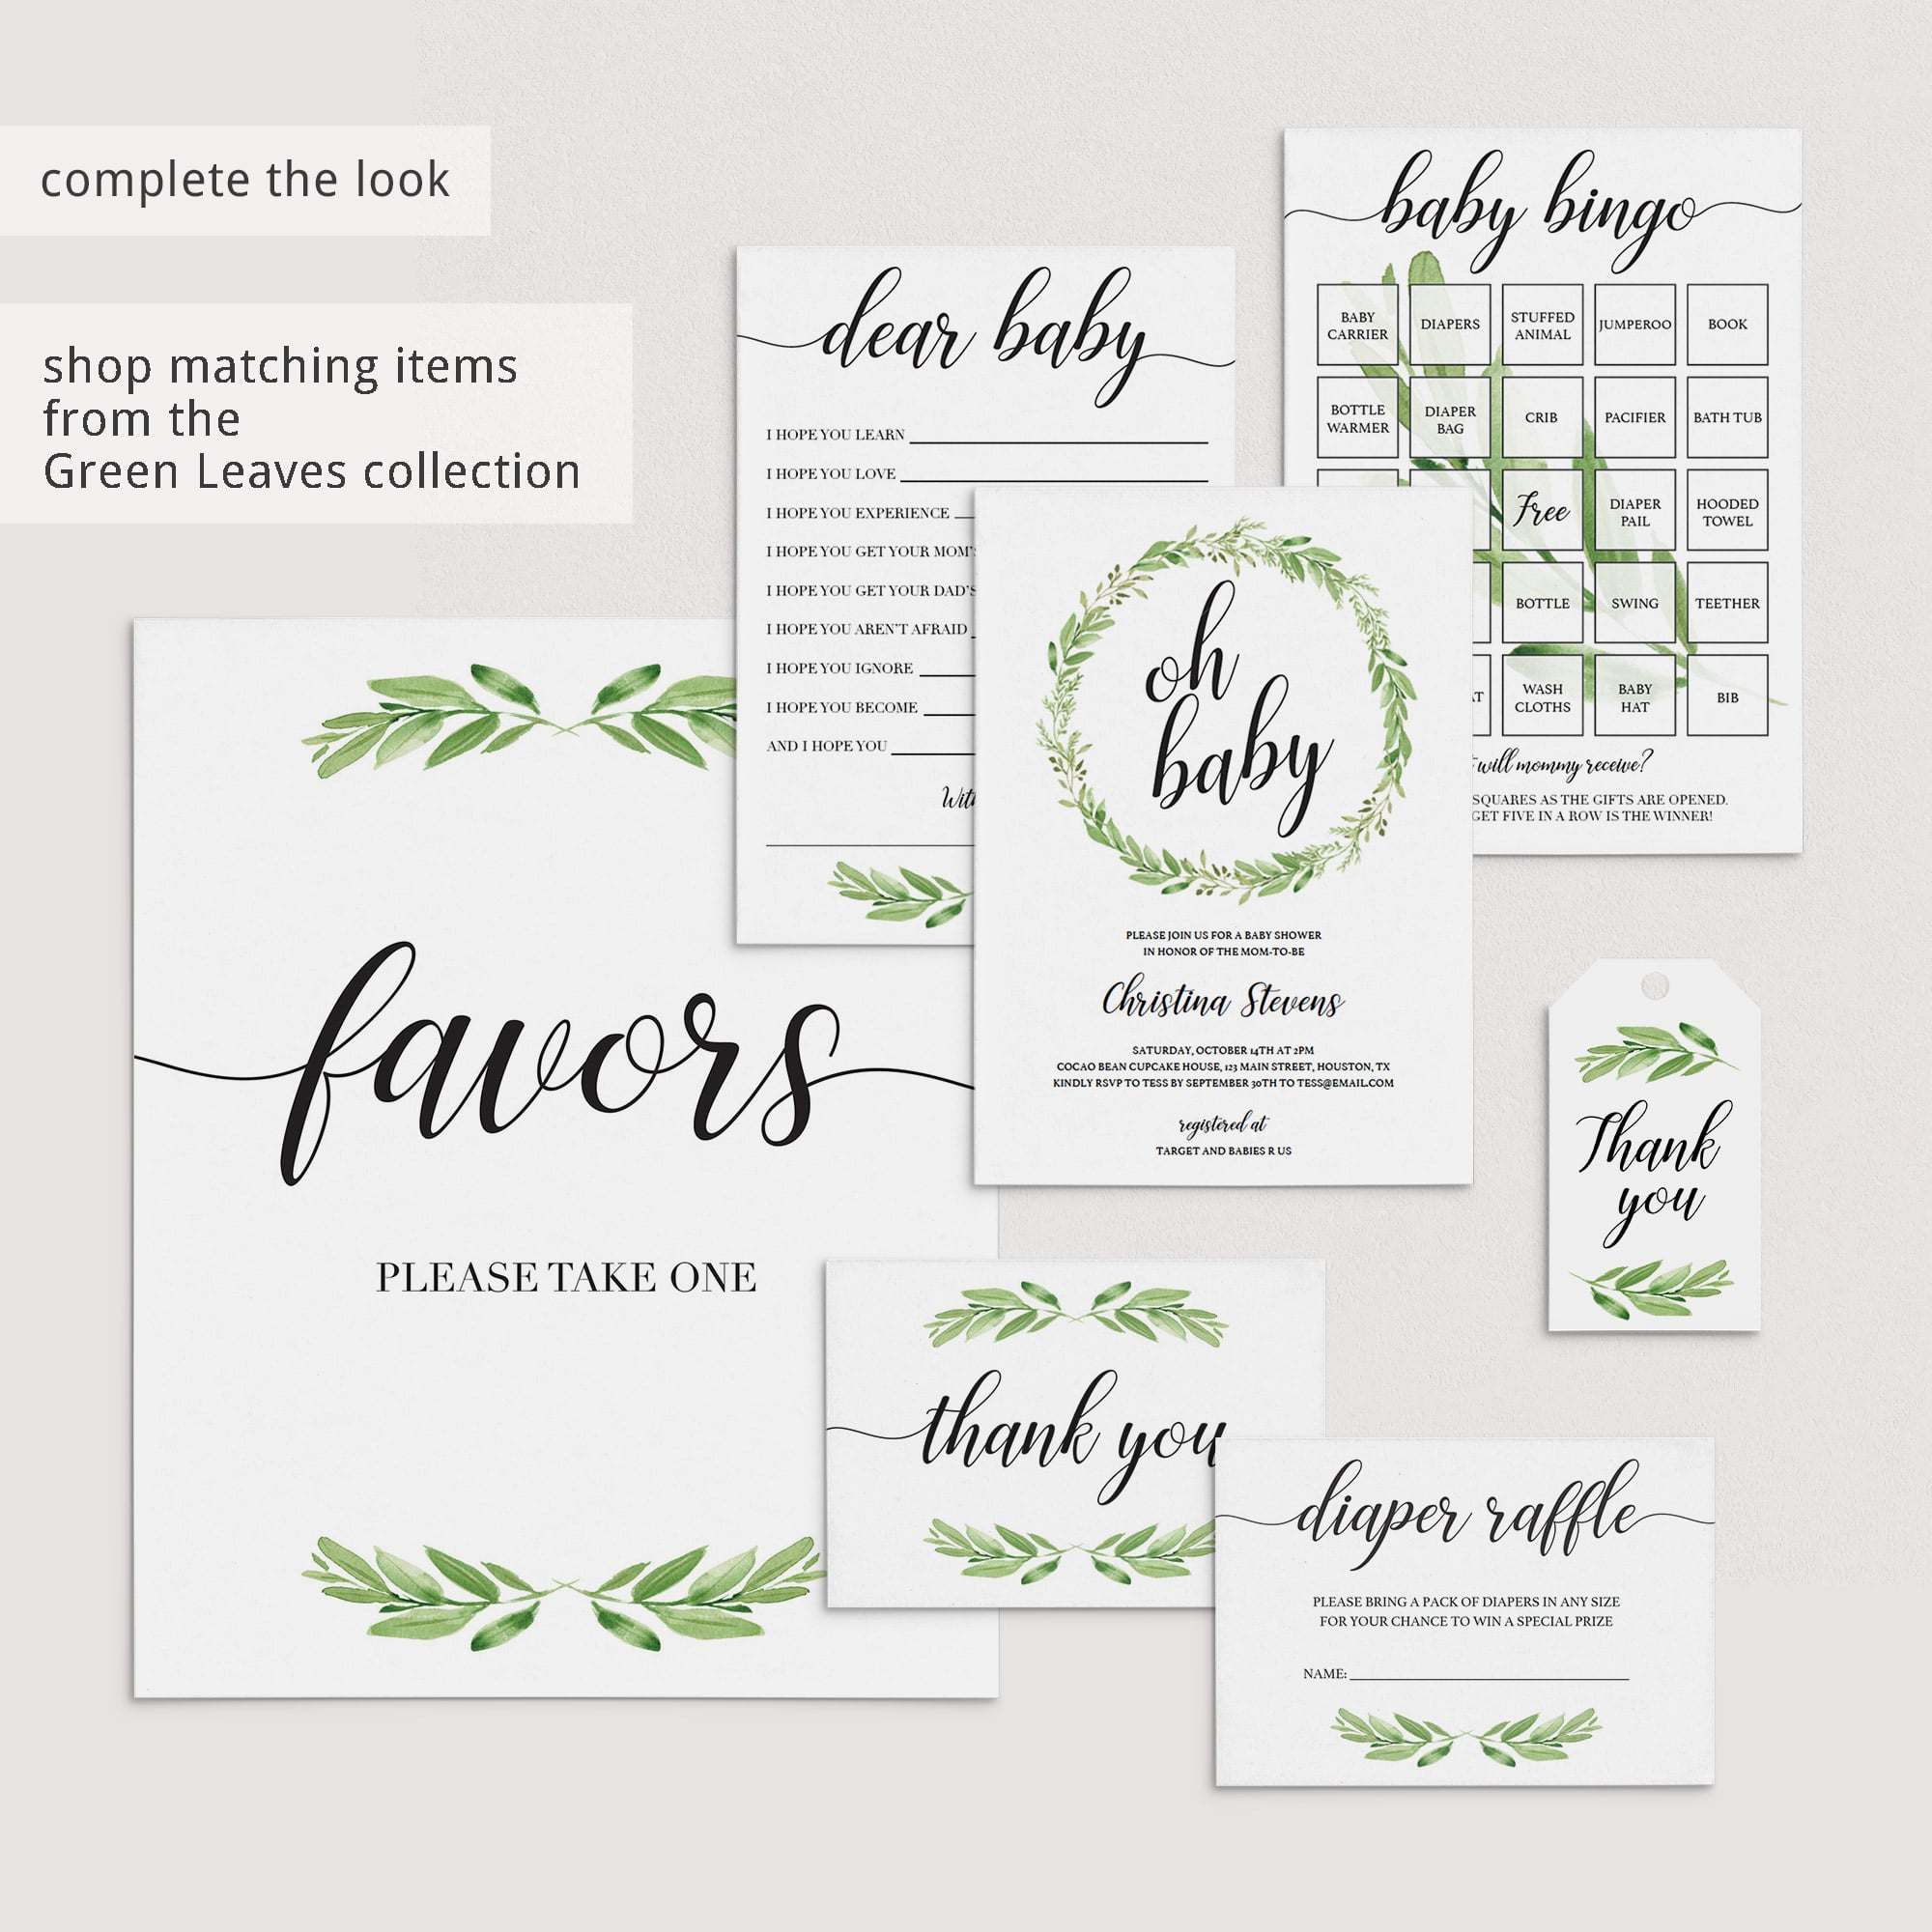 Printable baby shower ideas by LittleSizzle